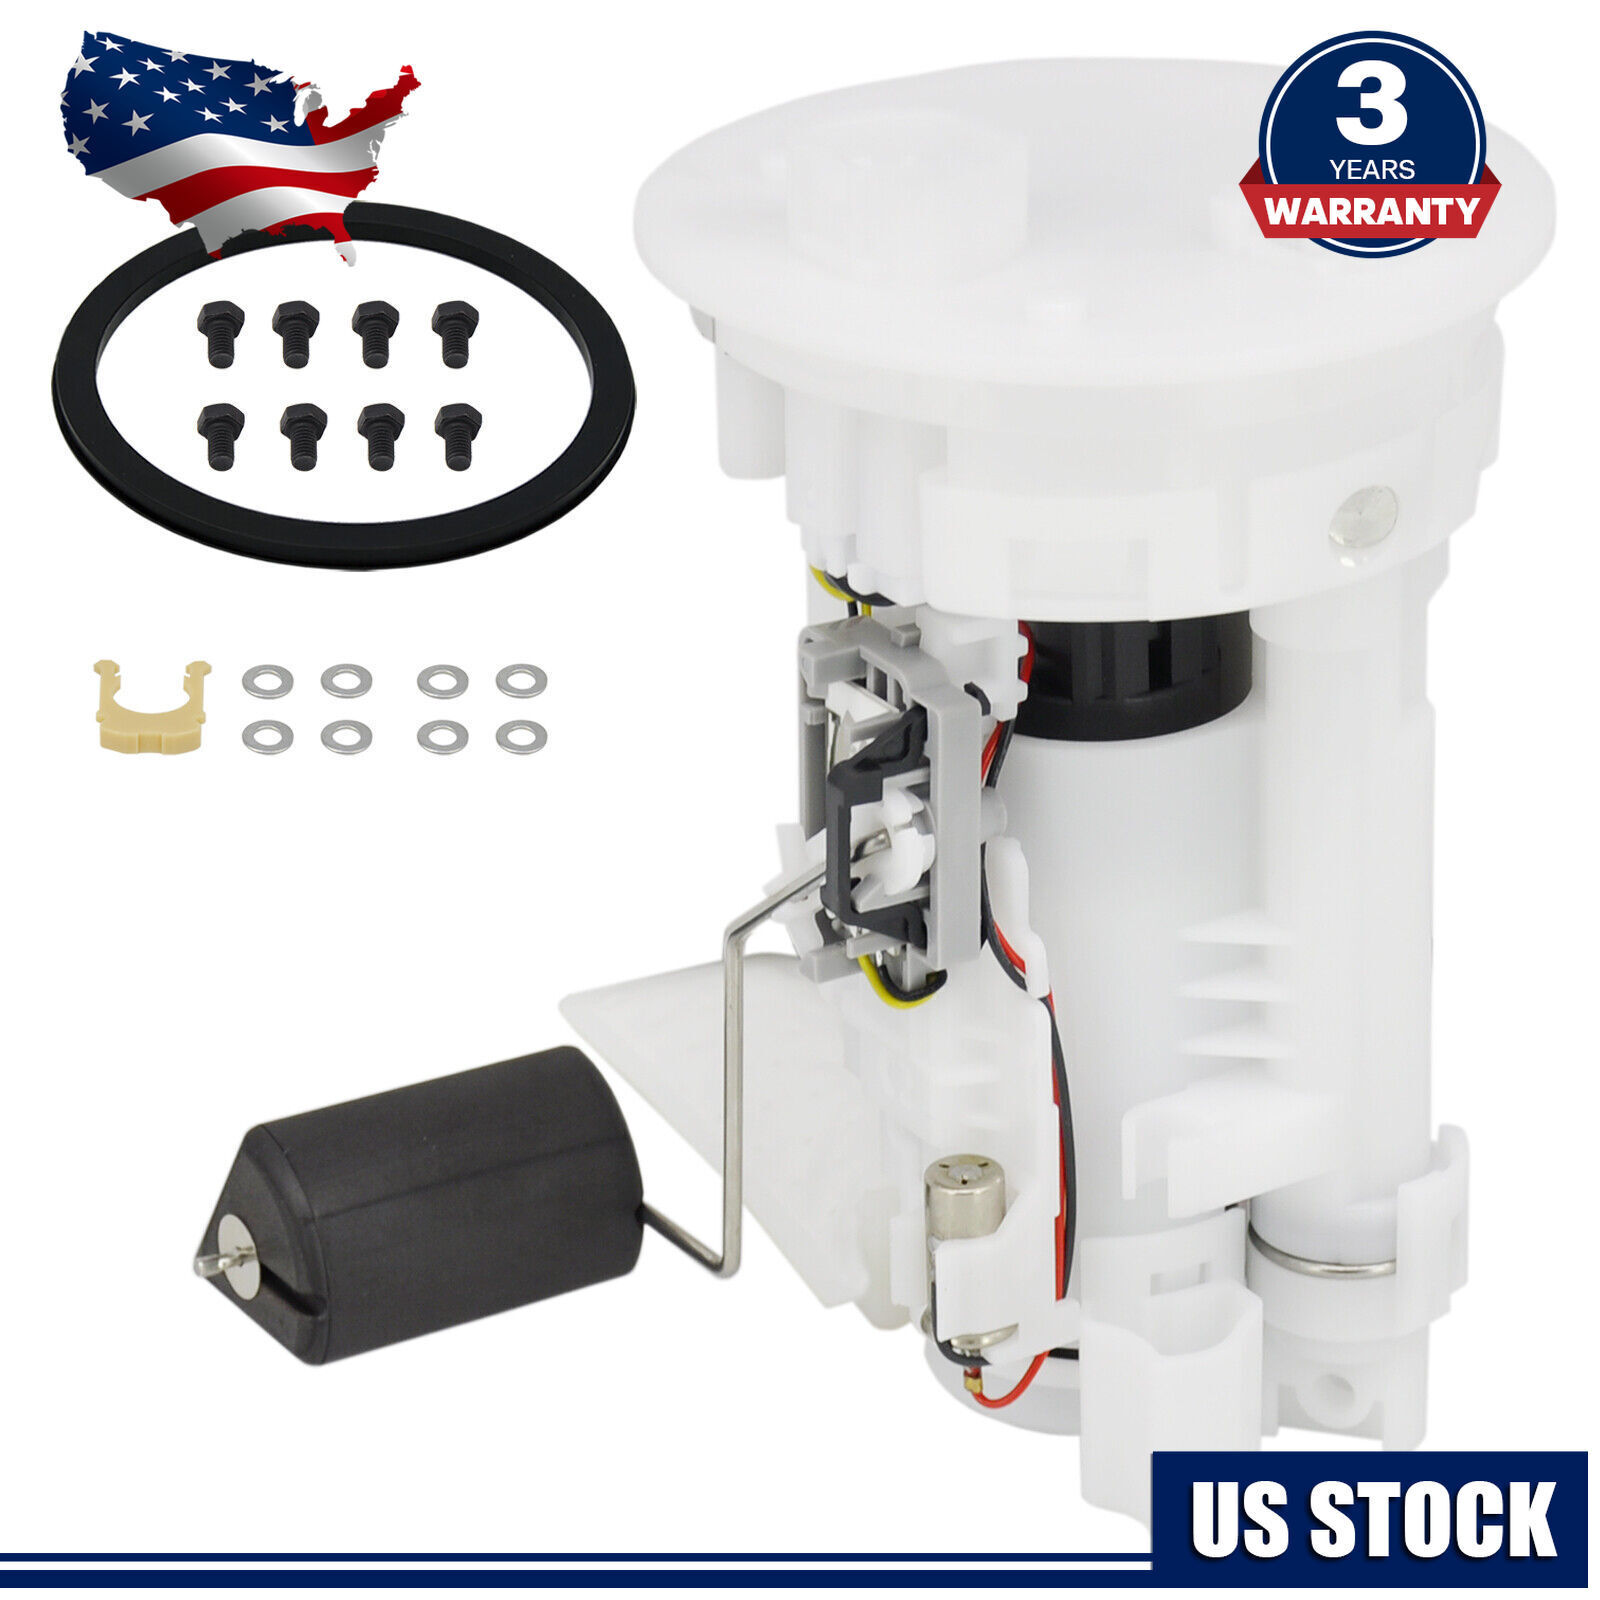 Fuel Pump Module Assembly For 98-02 Chevrolet Prizm Toyota Corolla 1.8L SP9163M